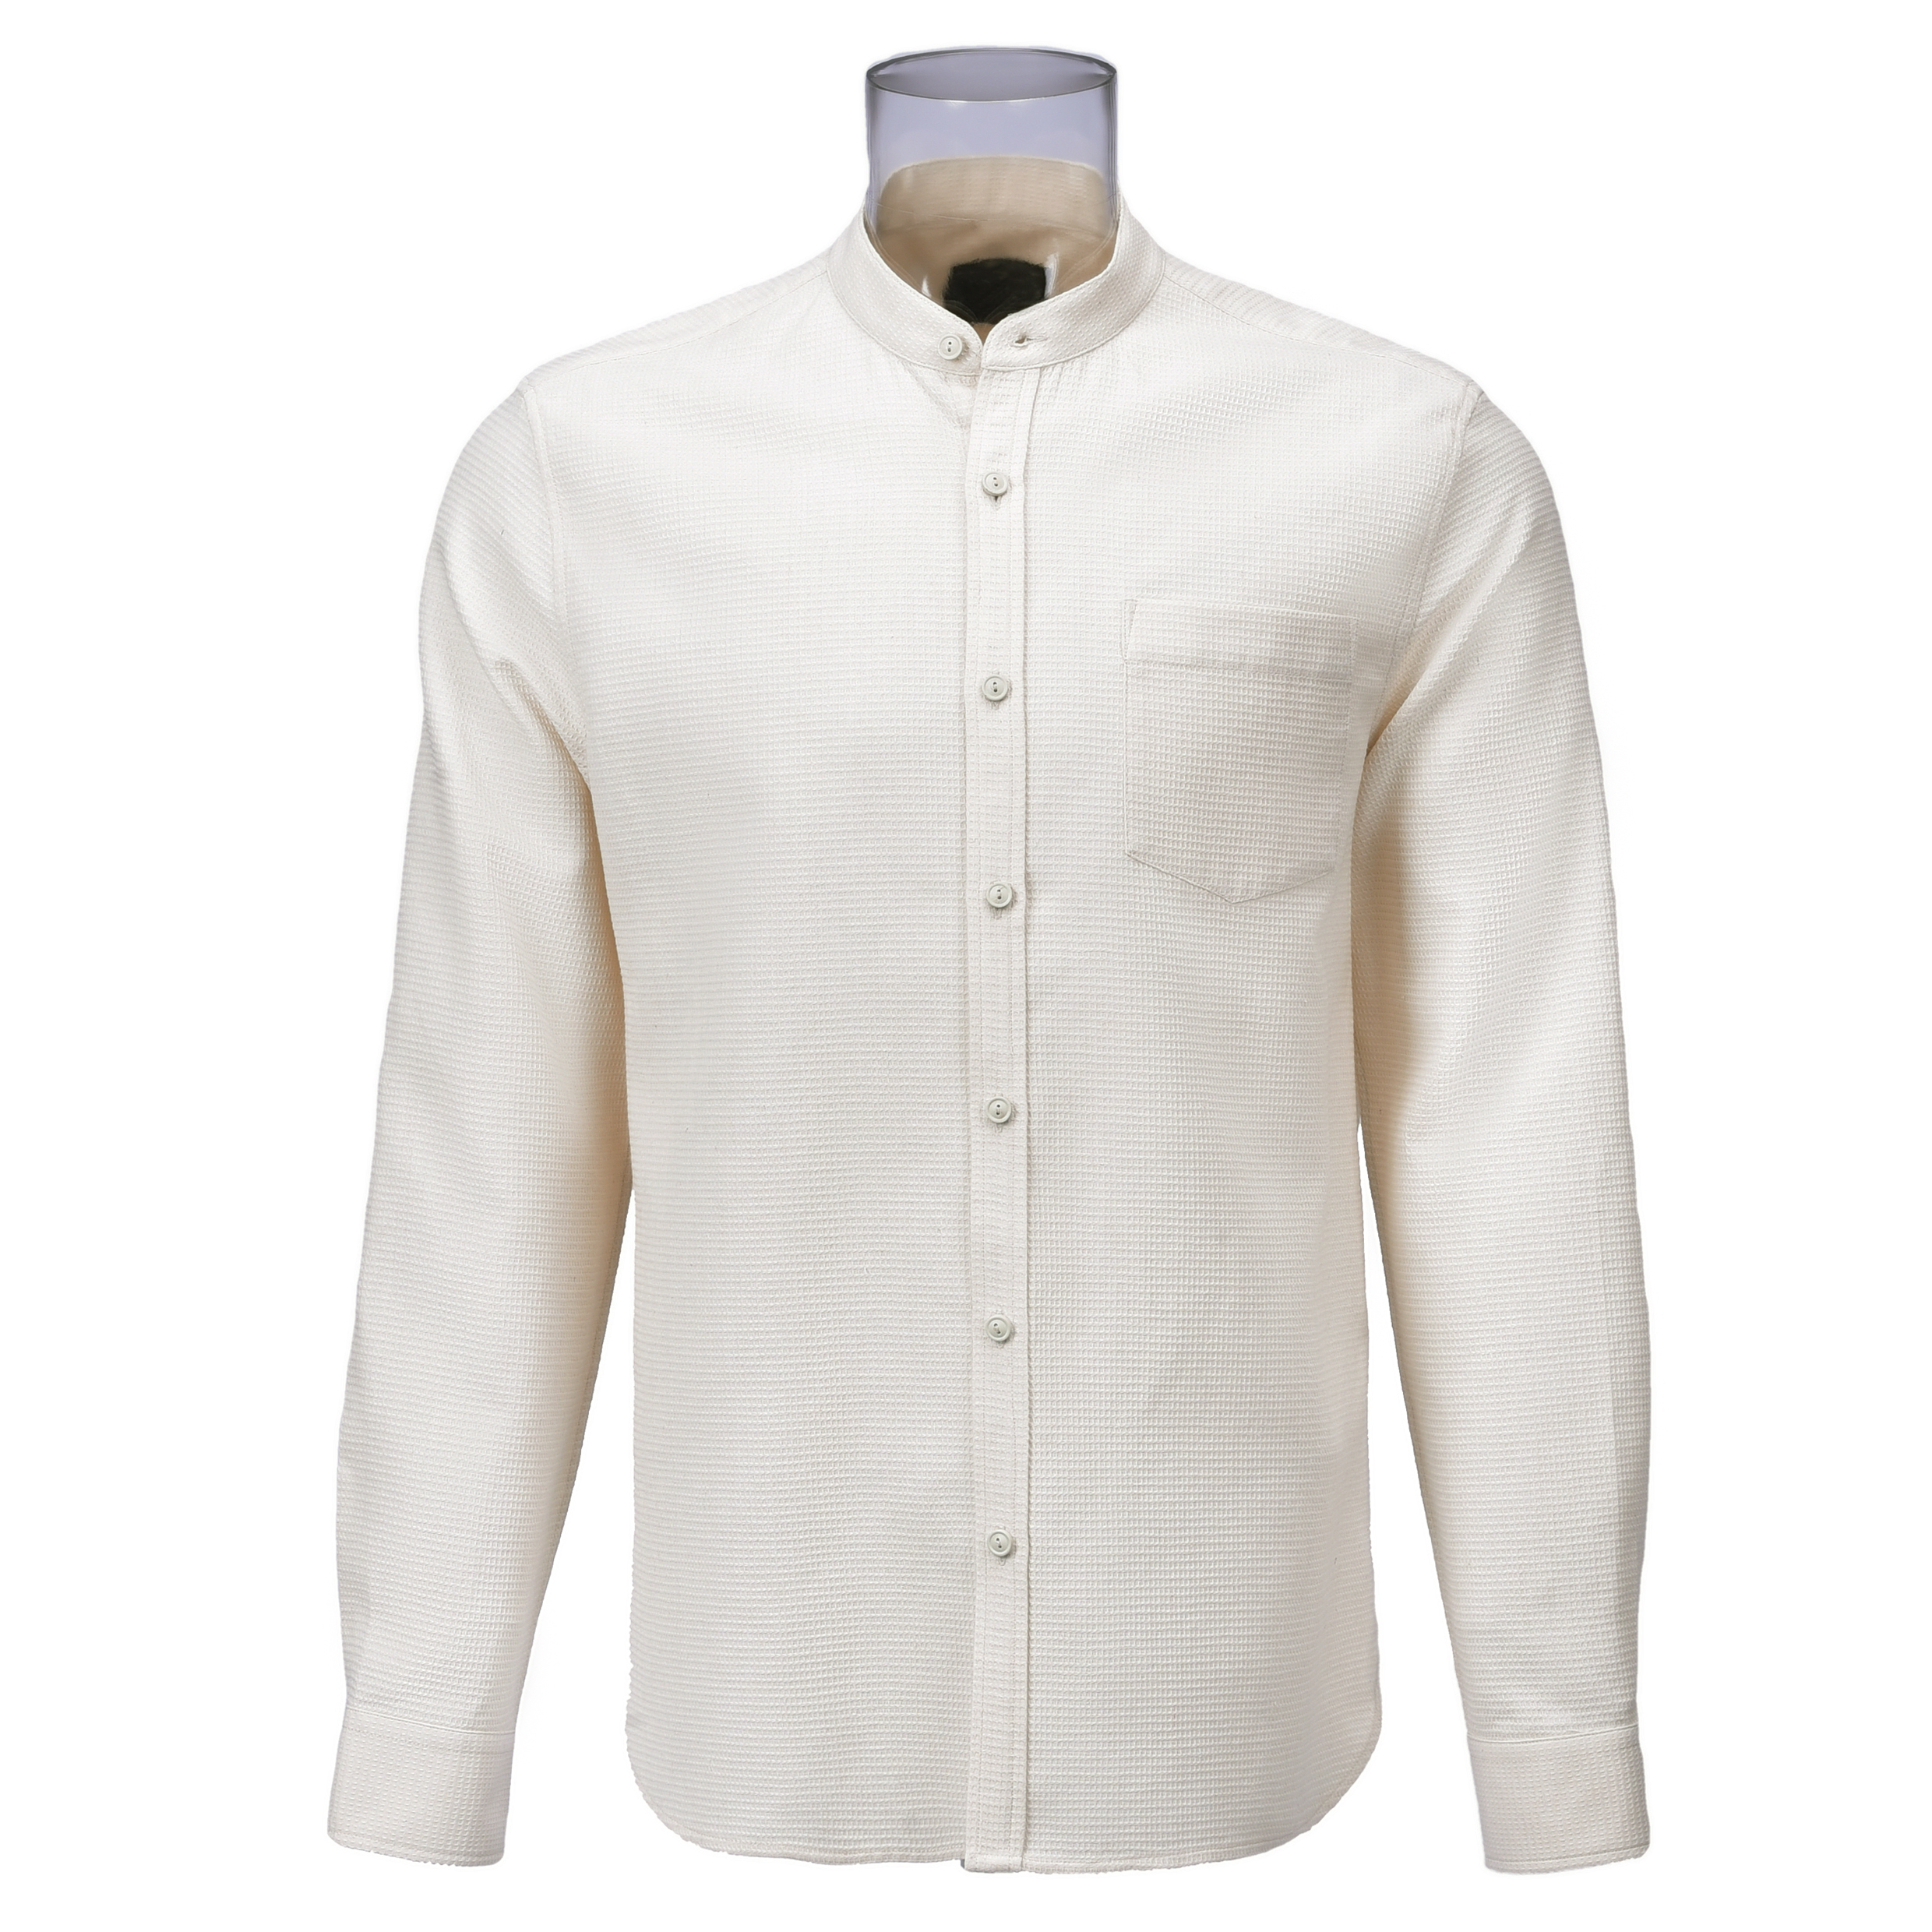 Men’s Long Sleeve Yarn Dyed White Dobby Shirt With Sustainable Recycled Polyester Blended For Men XYB-64-10(WHITE)G1